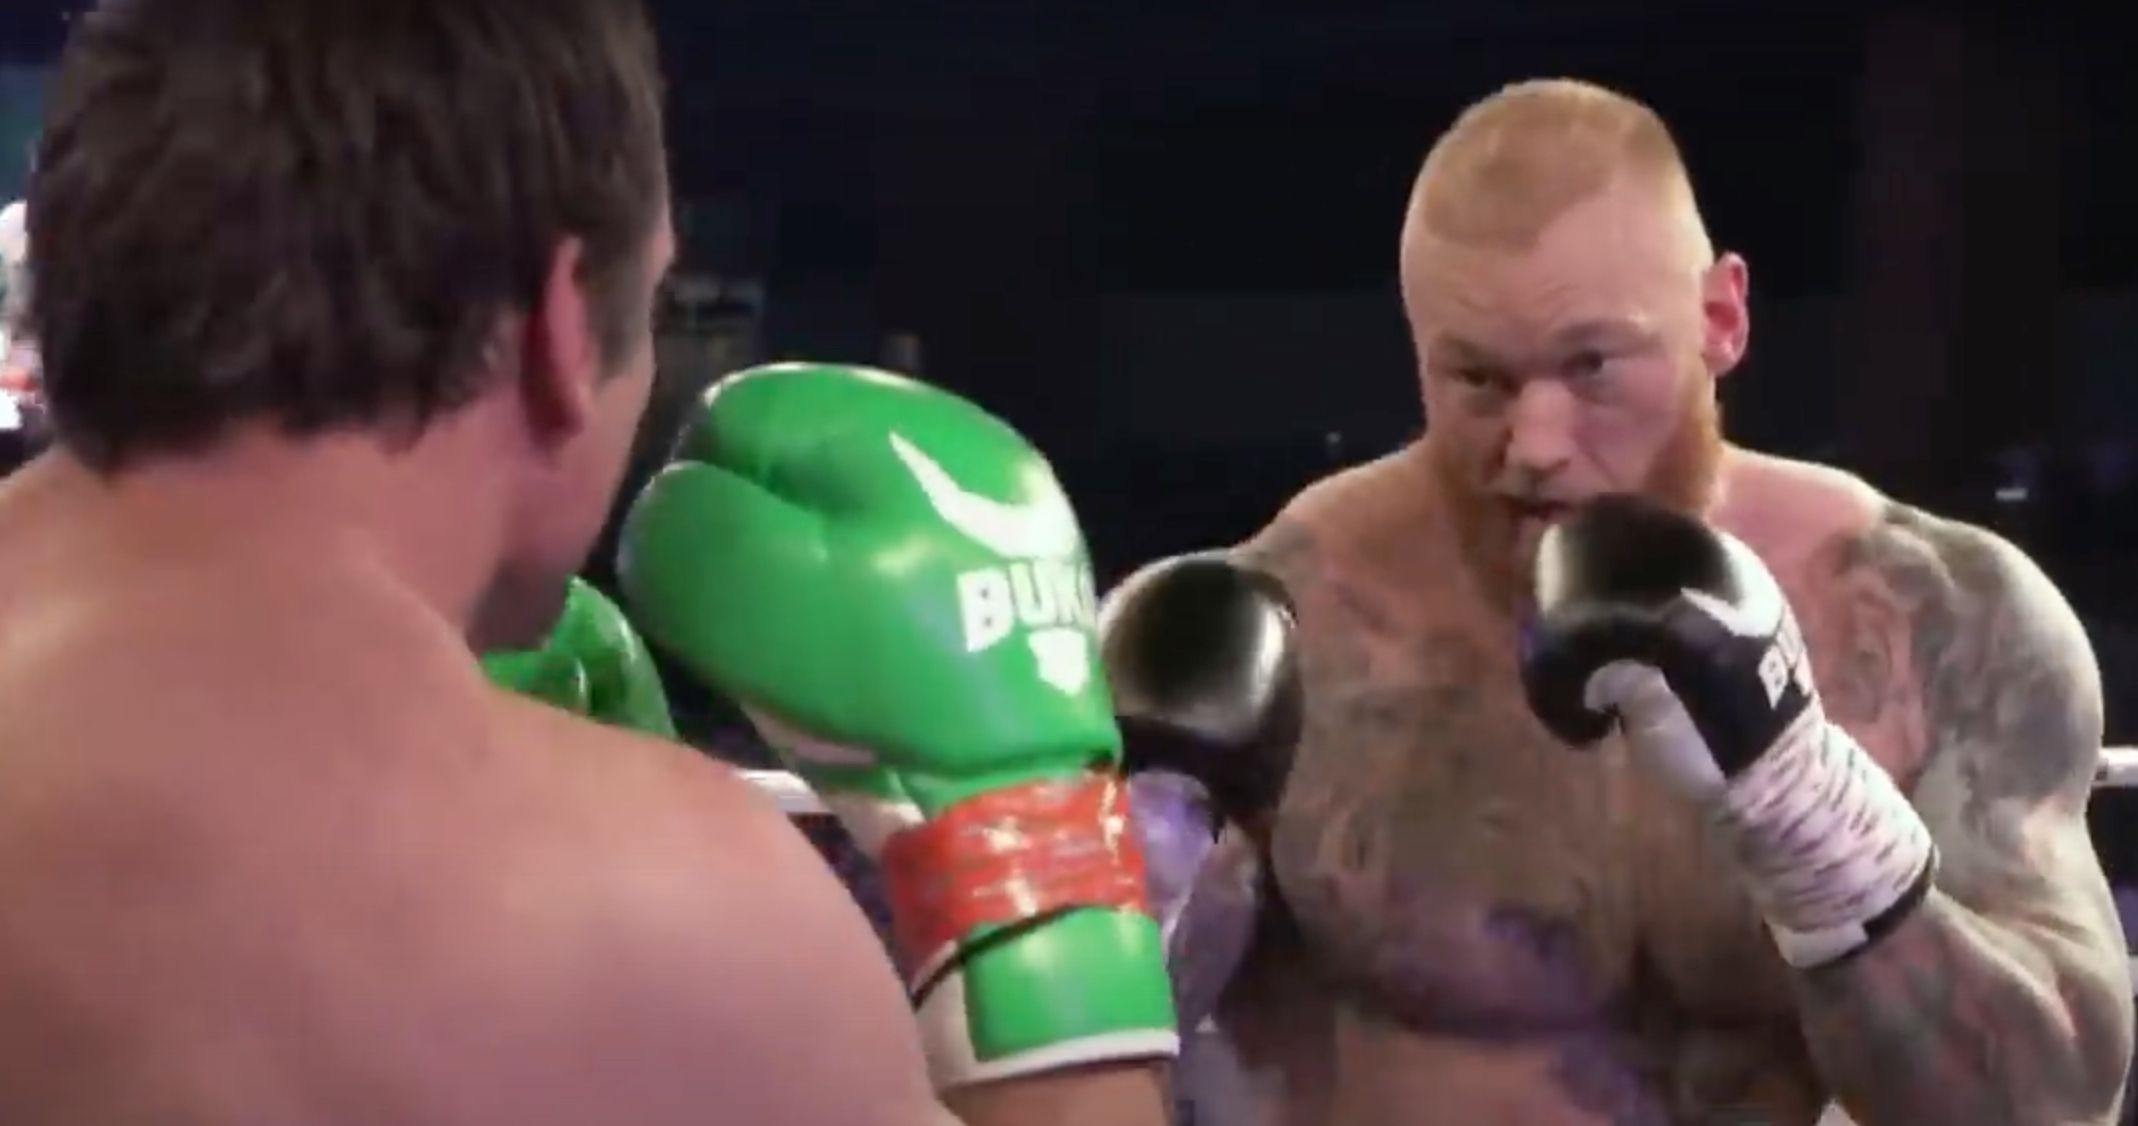 Game of Thrones Mountain Actor Thor Bjornsson Obliterates Opponent in Boxing Match